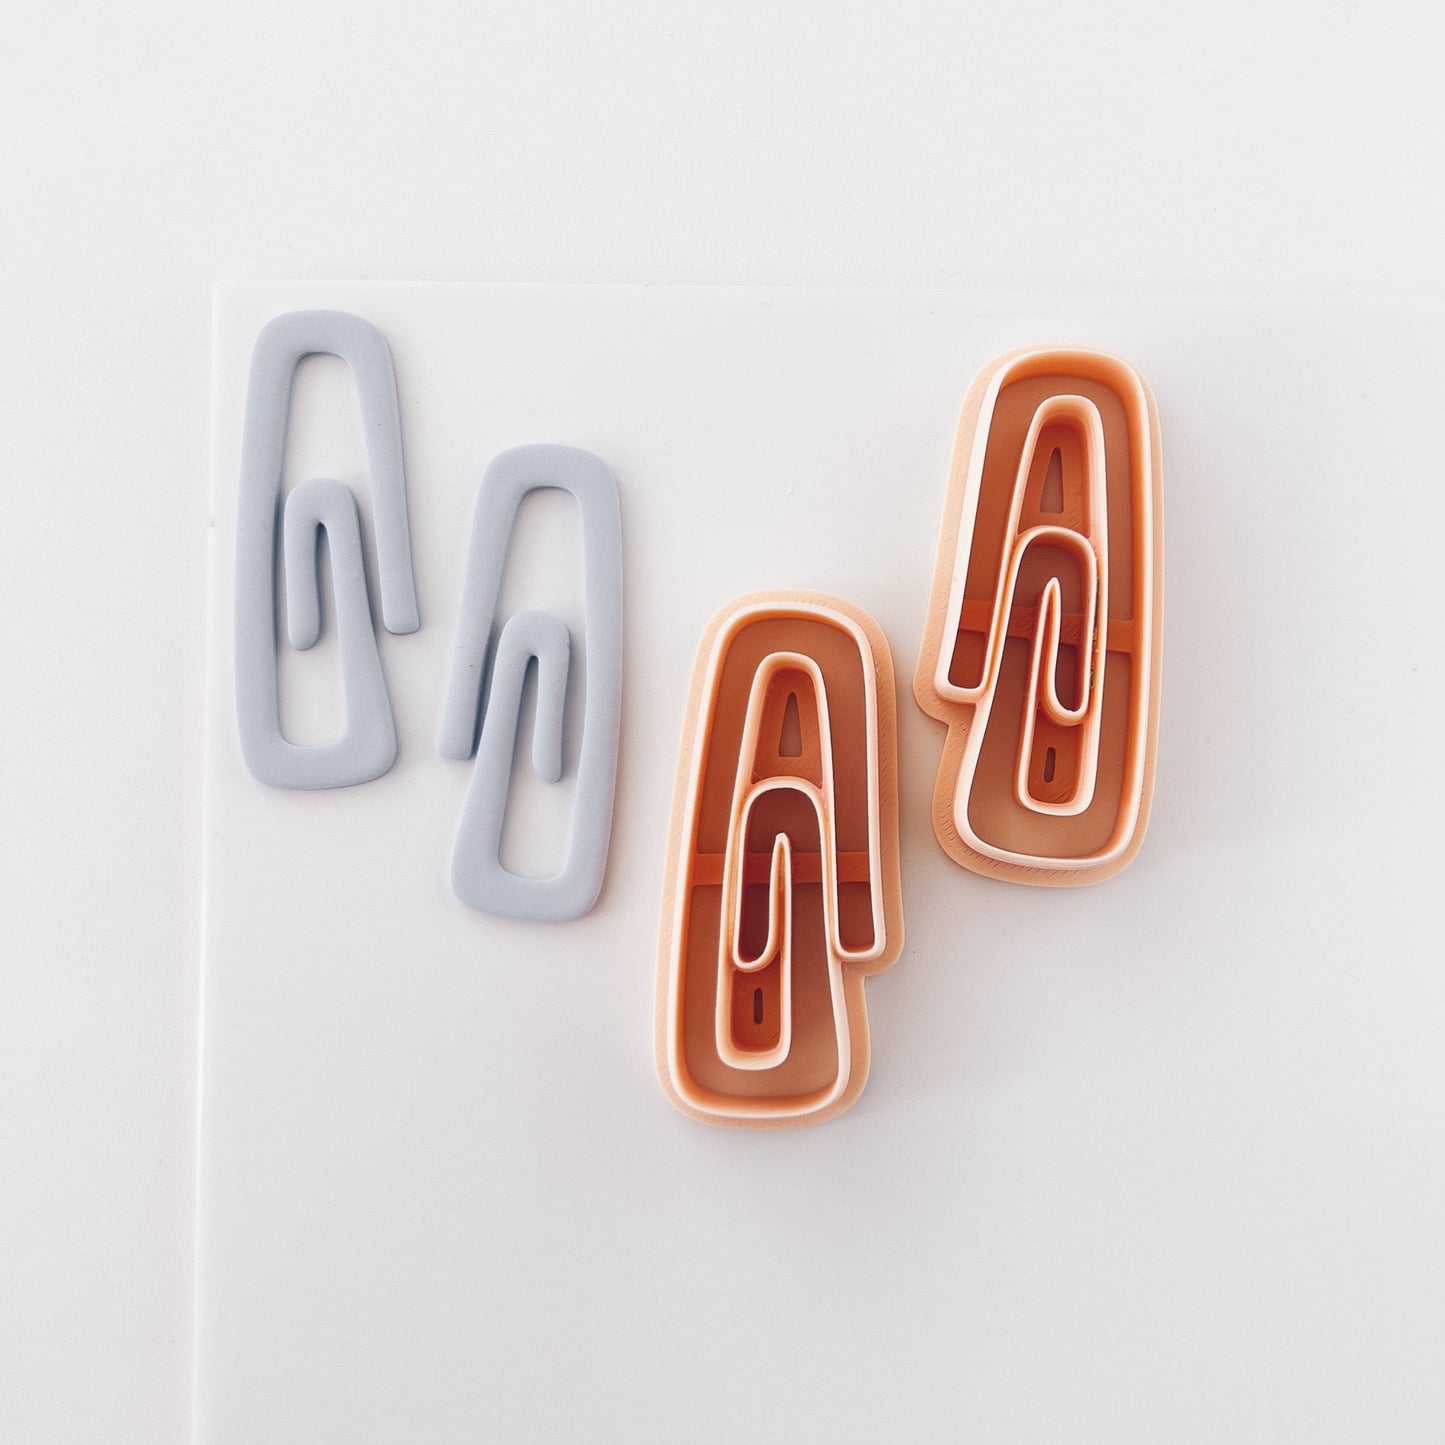 Clay cutter mirrored set